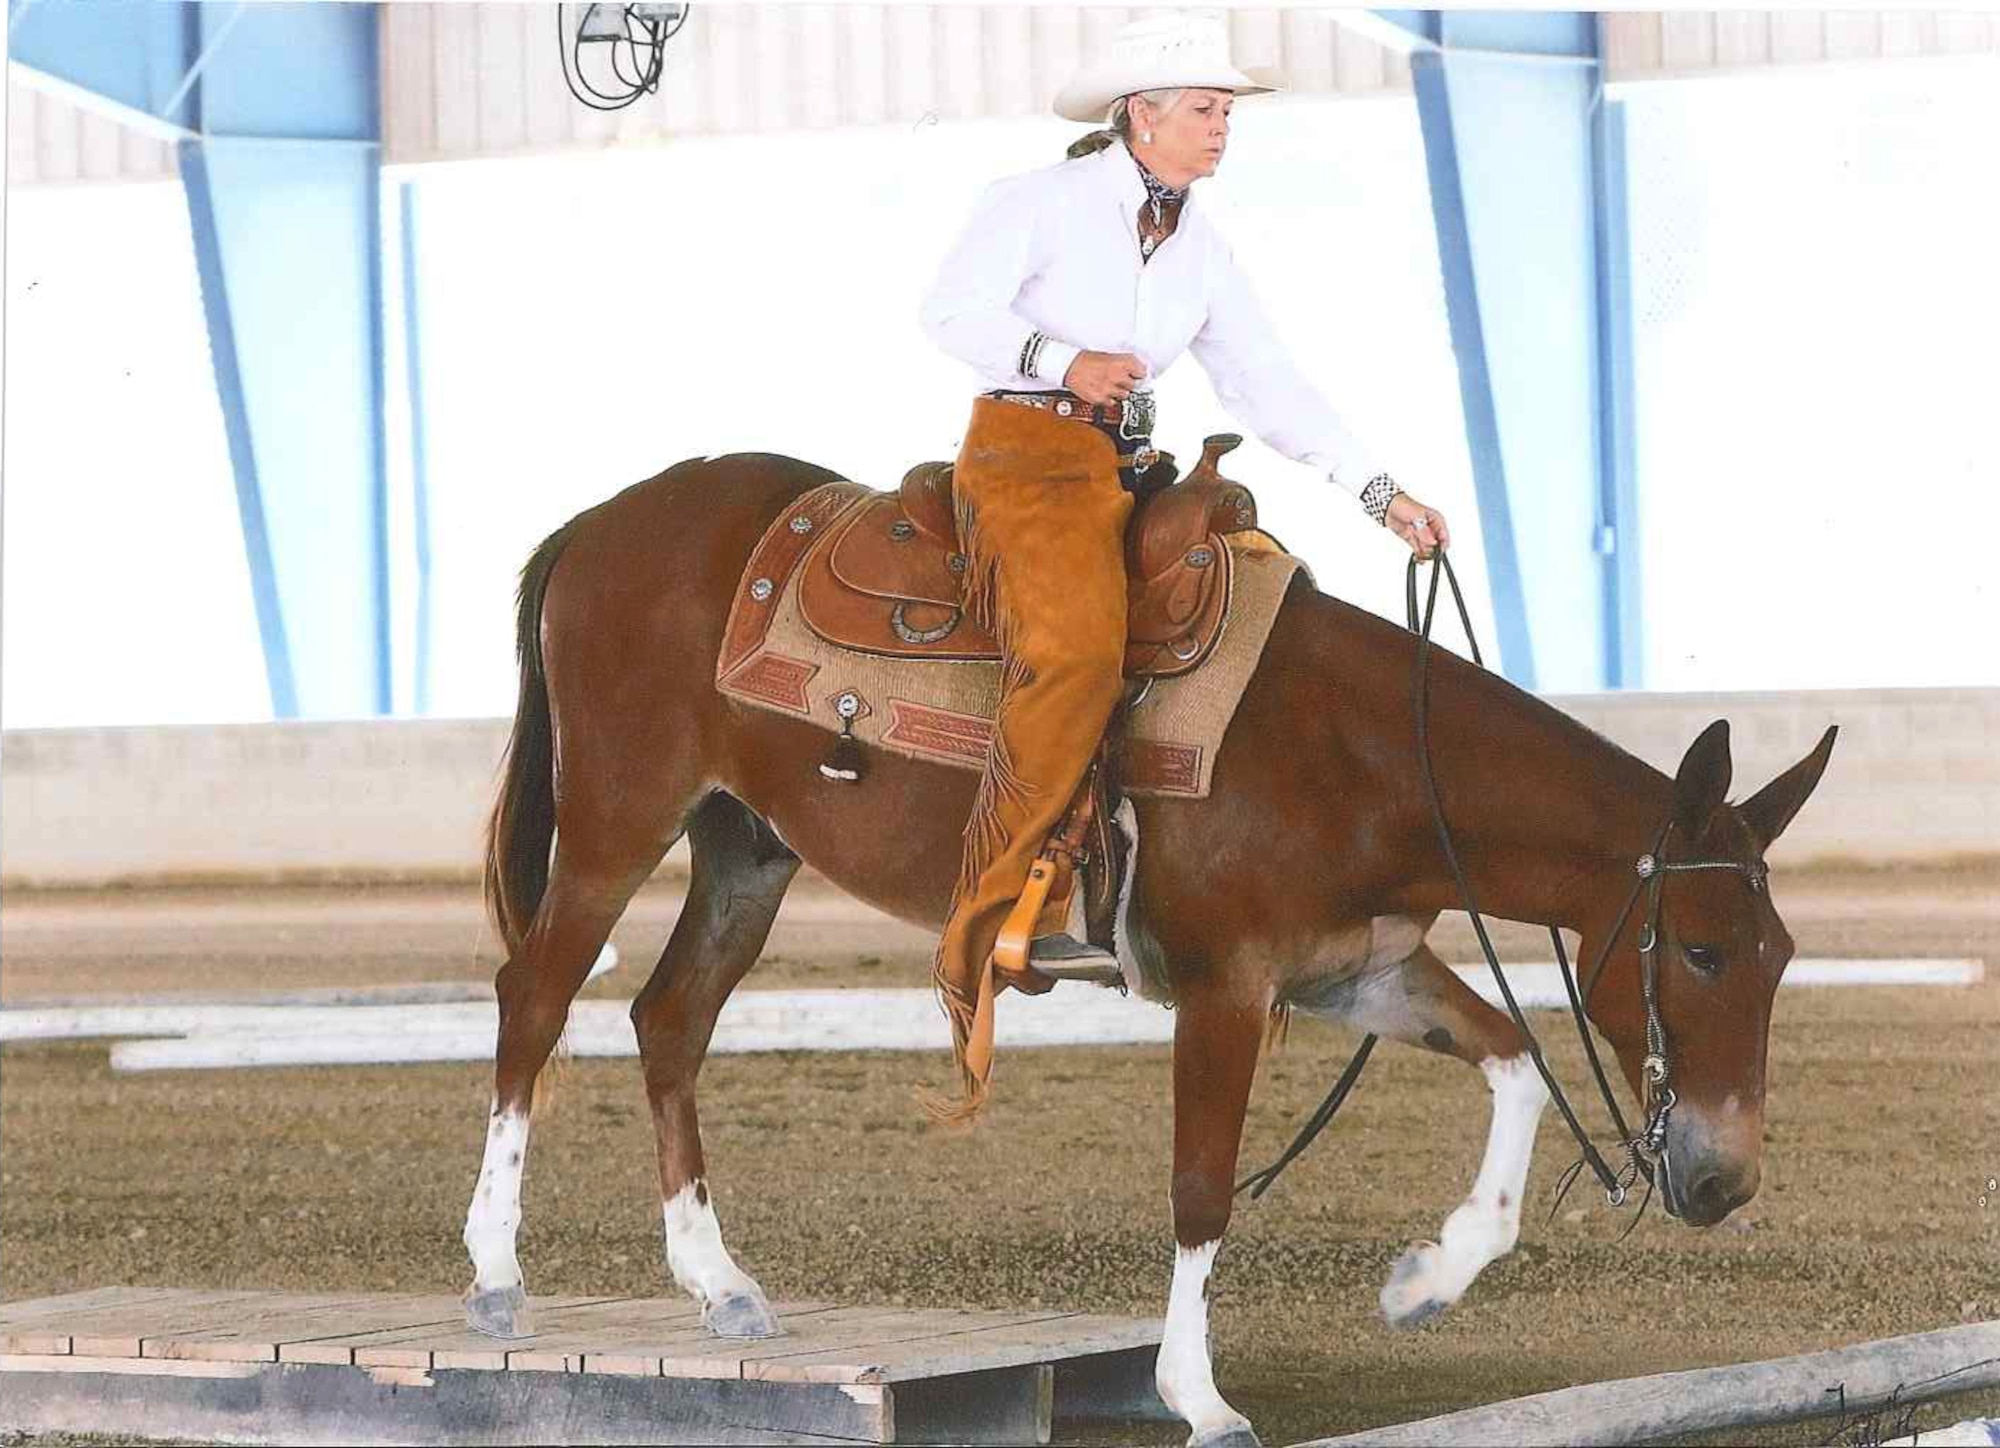 Kim Russell, AEDC property specialist, shows off the reining skills of her mule Gus. Russell had shown horses in competitions for many years but later became interested in acquiring a mule. She later found Gus through an ad on Craigslist and has since trained him to become a competition-winning mule. (Courtesy photo/Kim Russell)